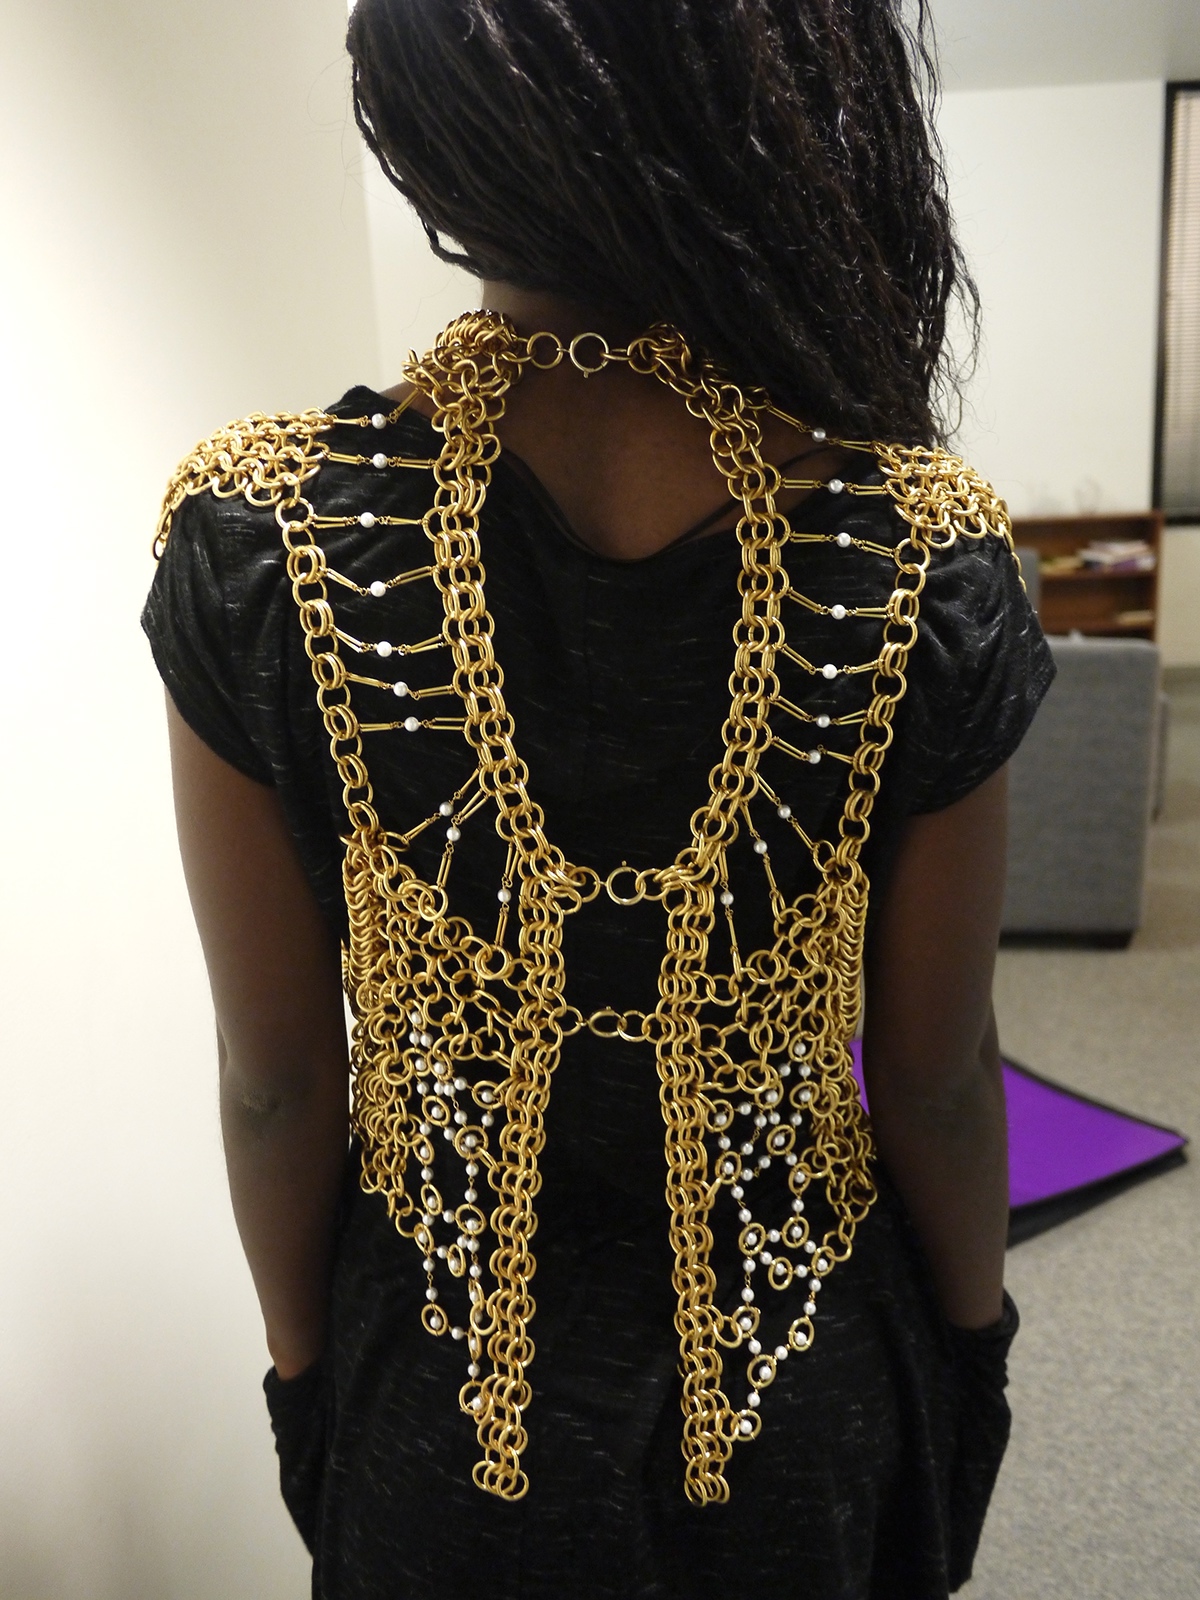 shirt couture chainmail gold ostentatious